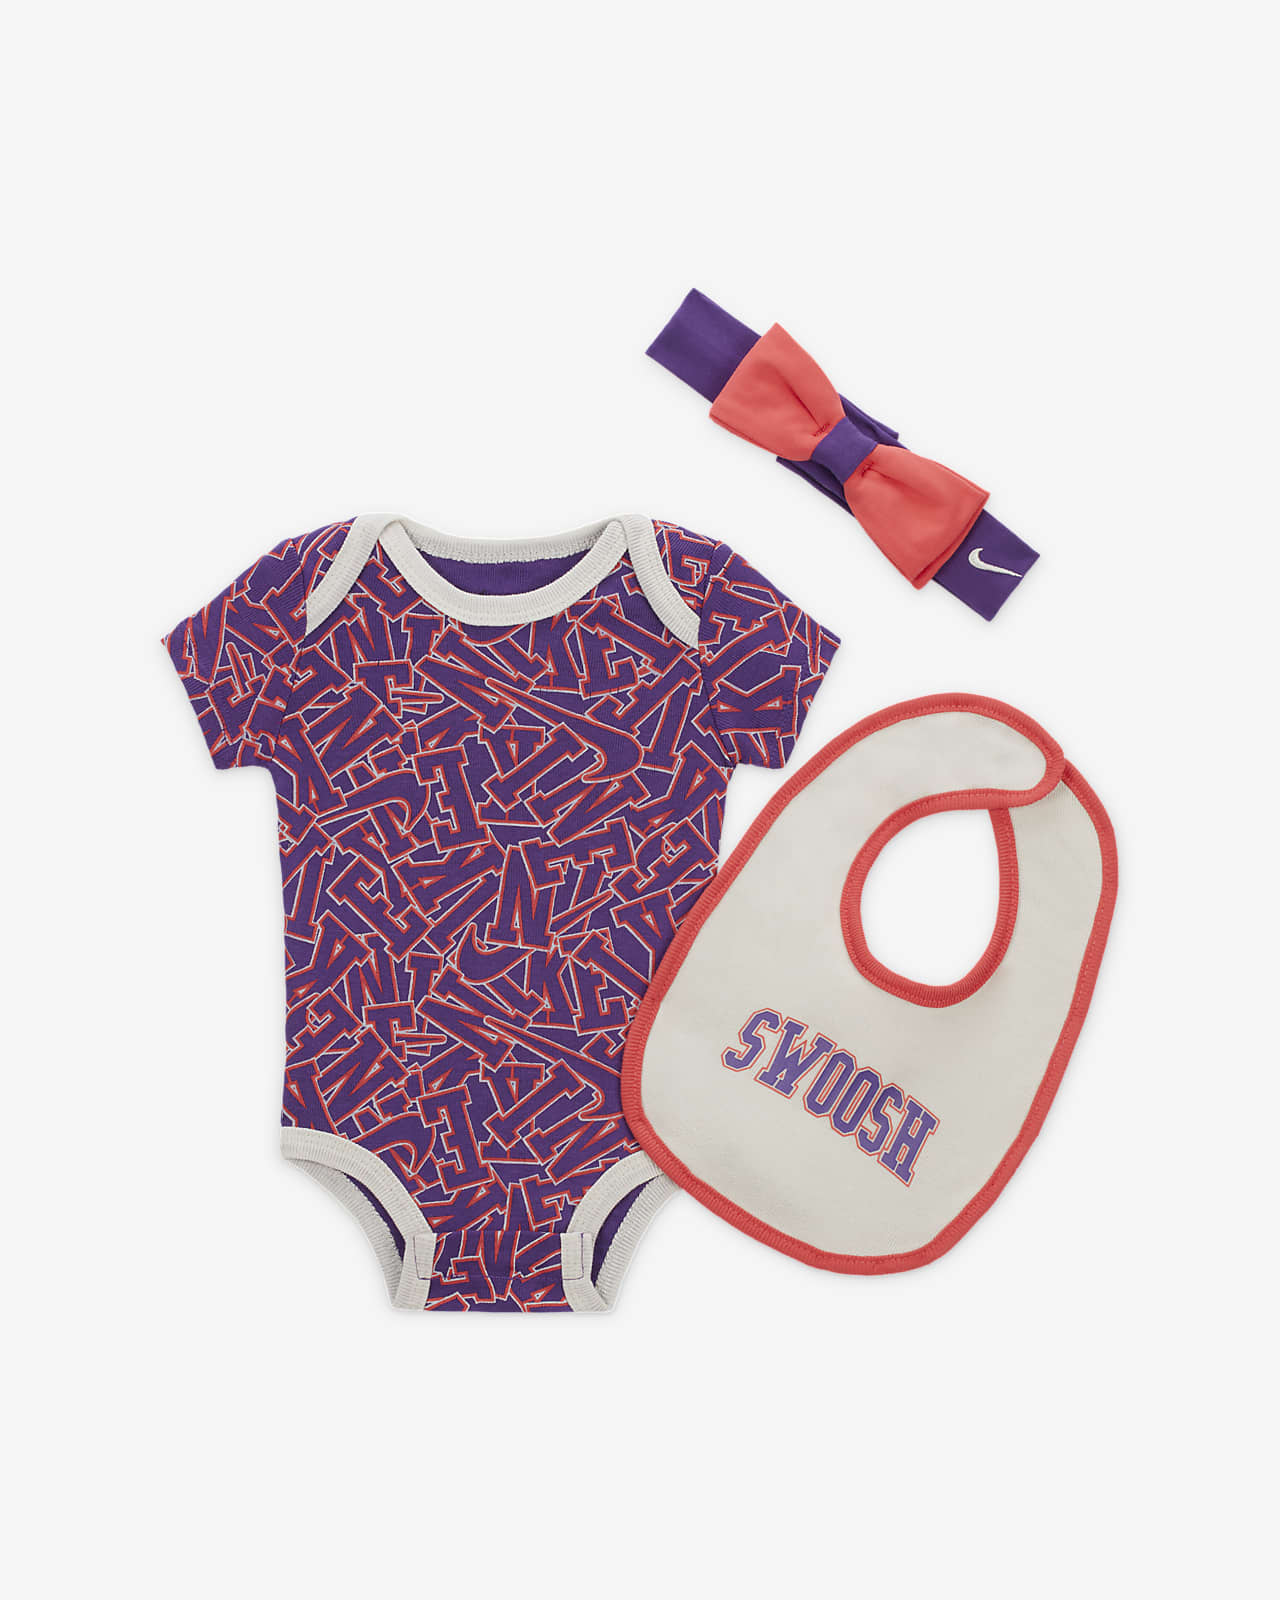 Nike "Join the Club" 3-Piece Boxed Set Baby 3-Piece Bodysuit Set